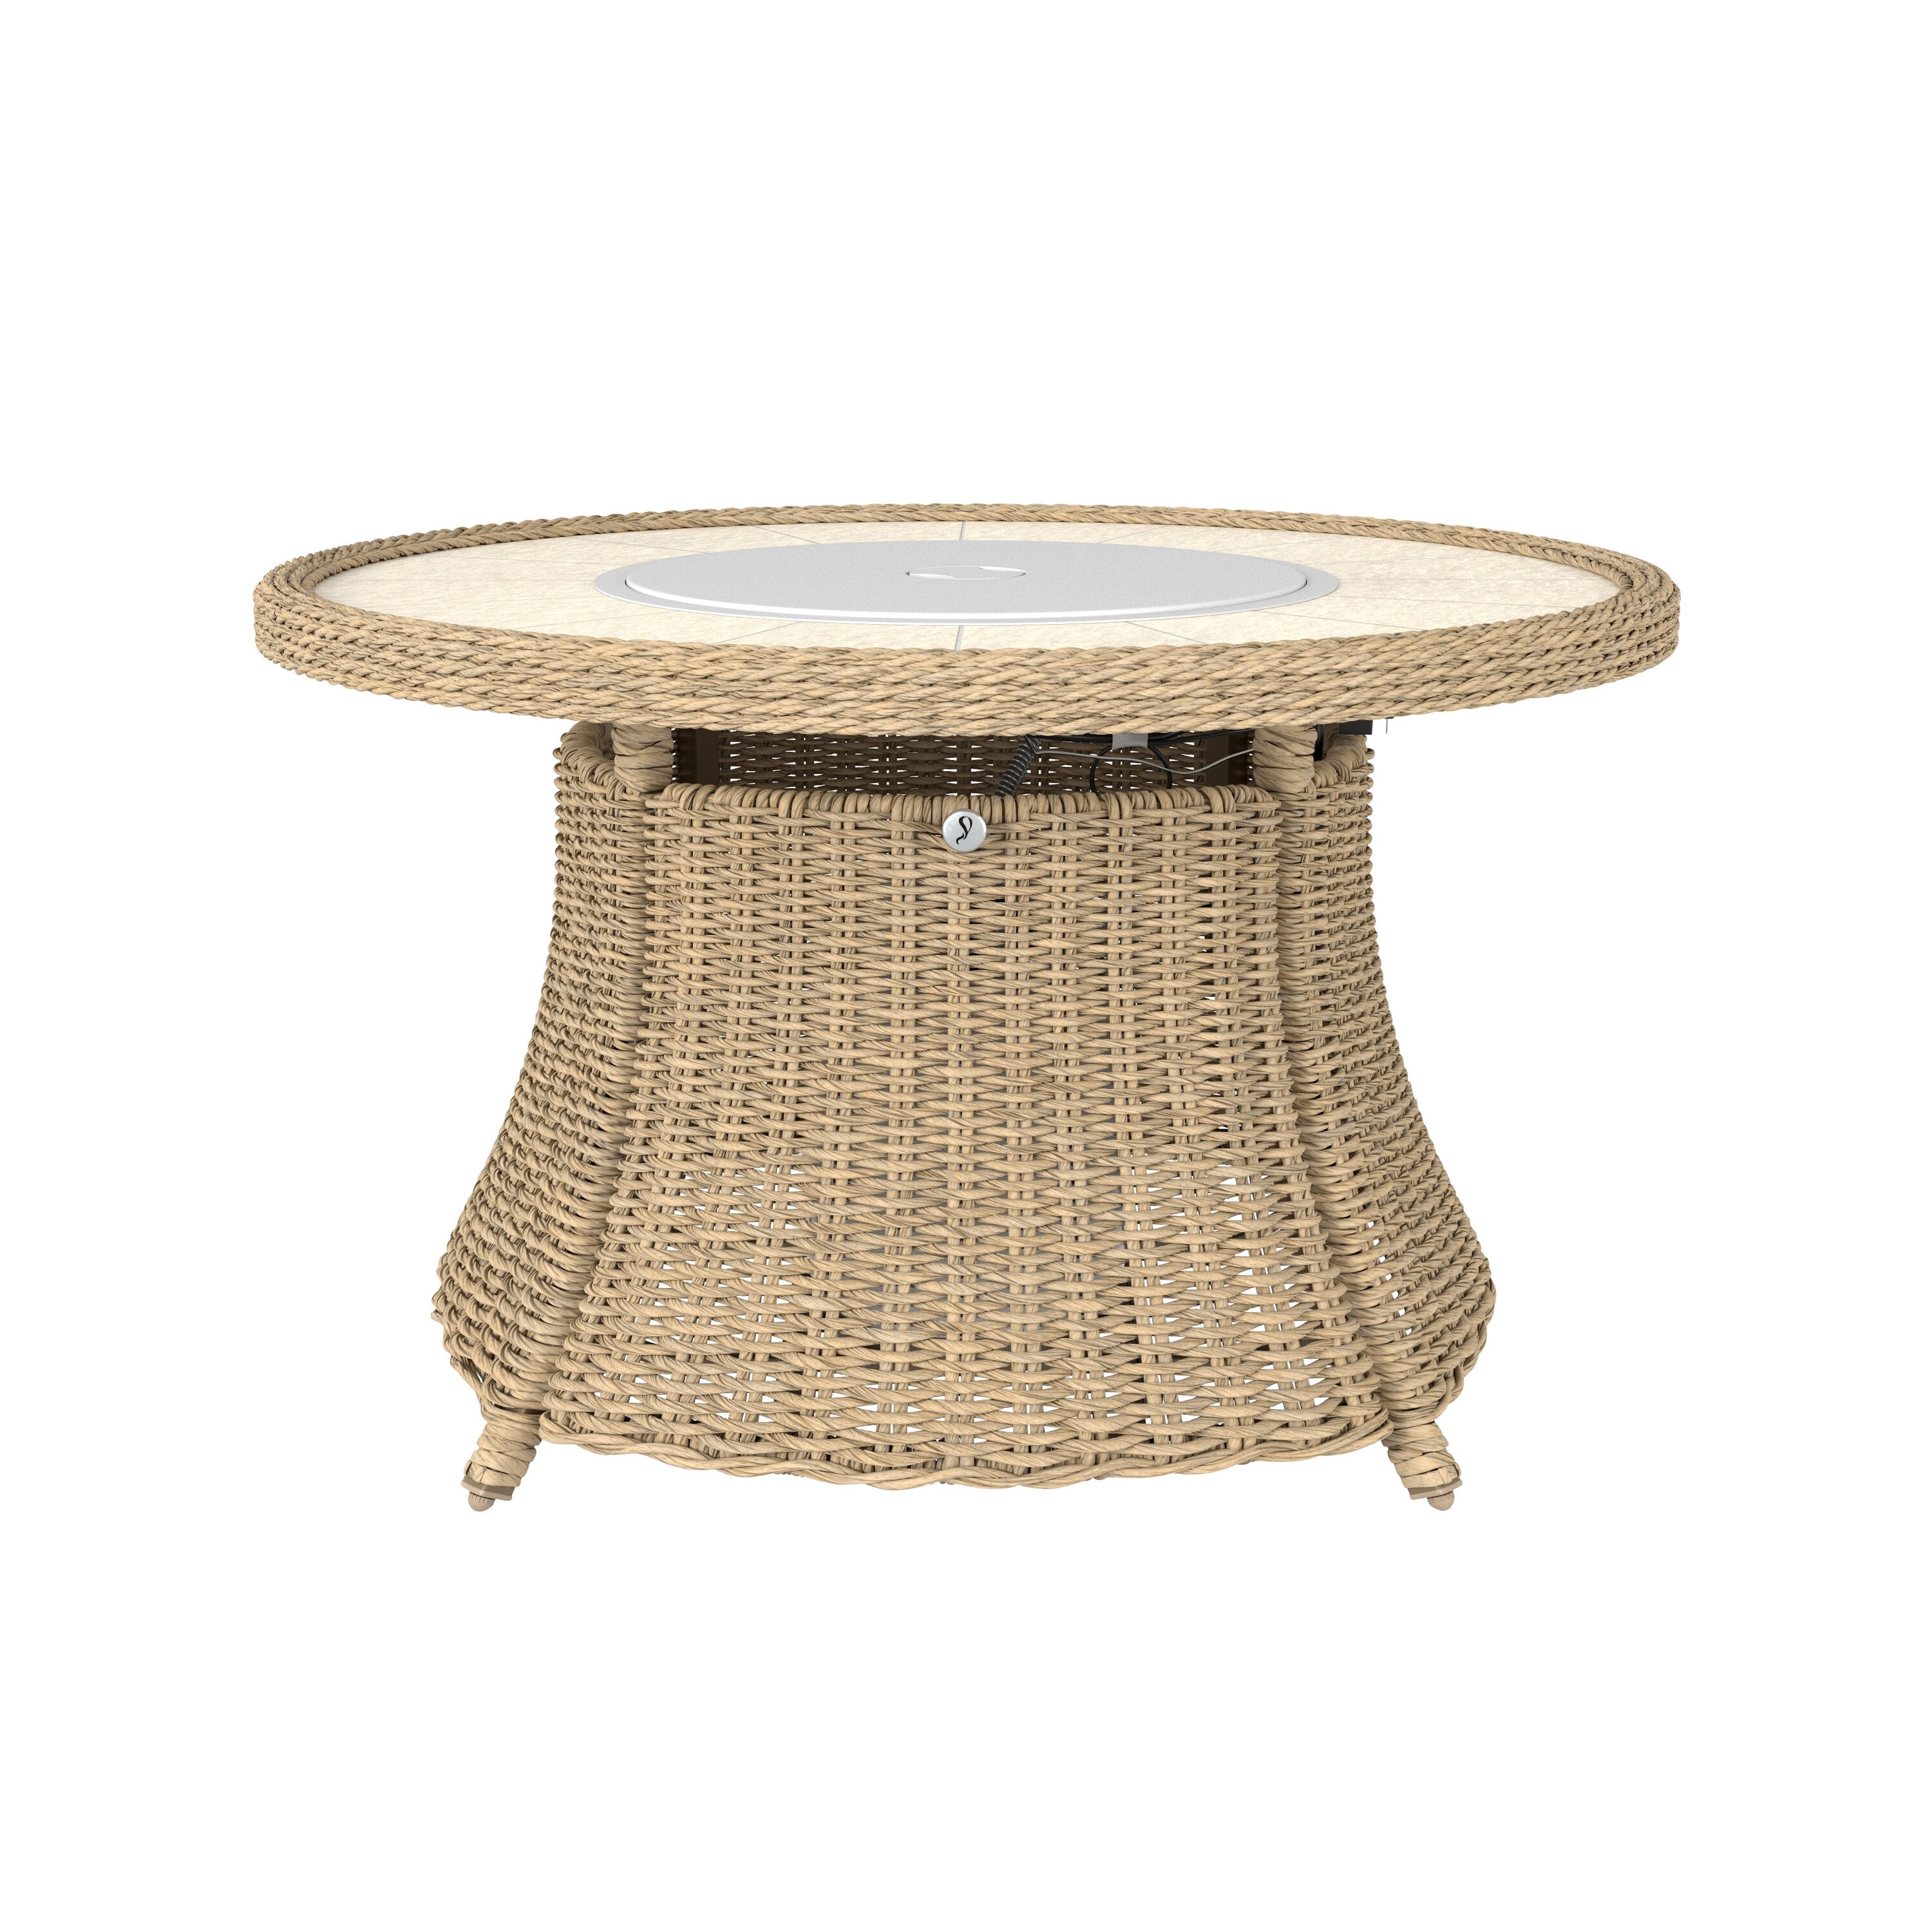 Roth Buchan Bay 41 93 In W 55000 Btu, Fire Pit Table Manufacturers